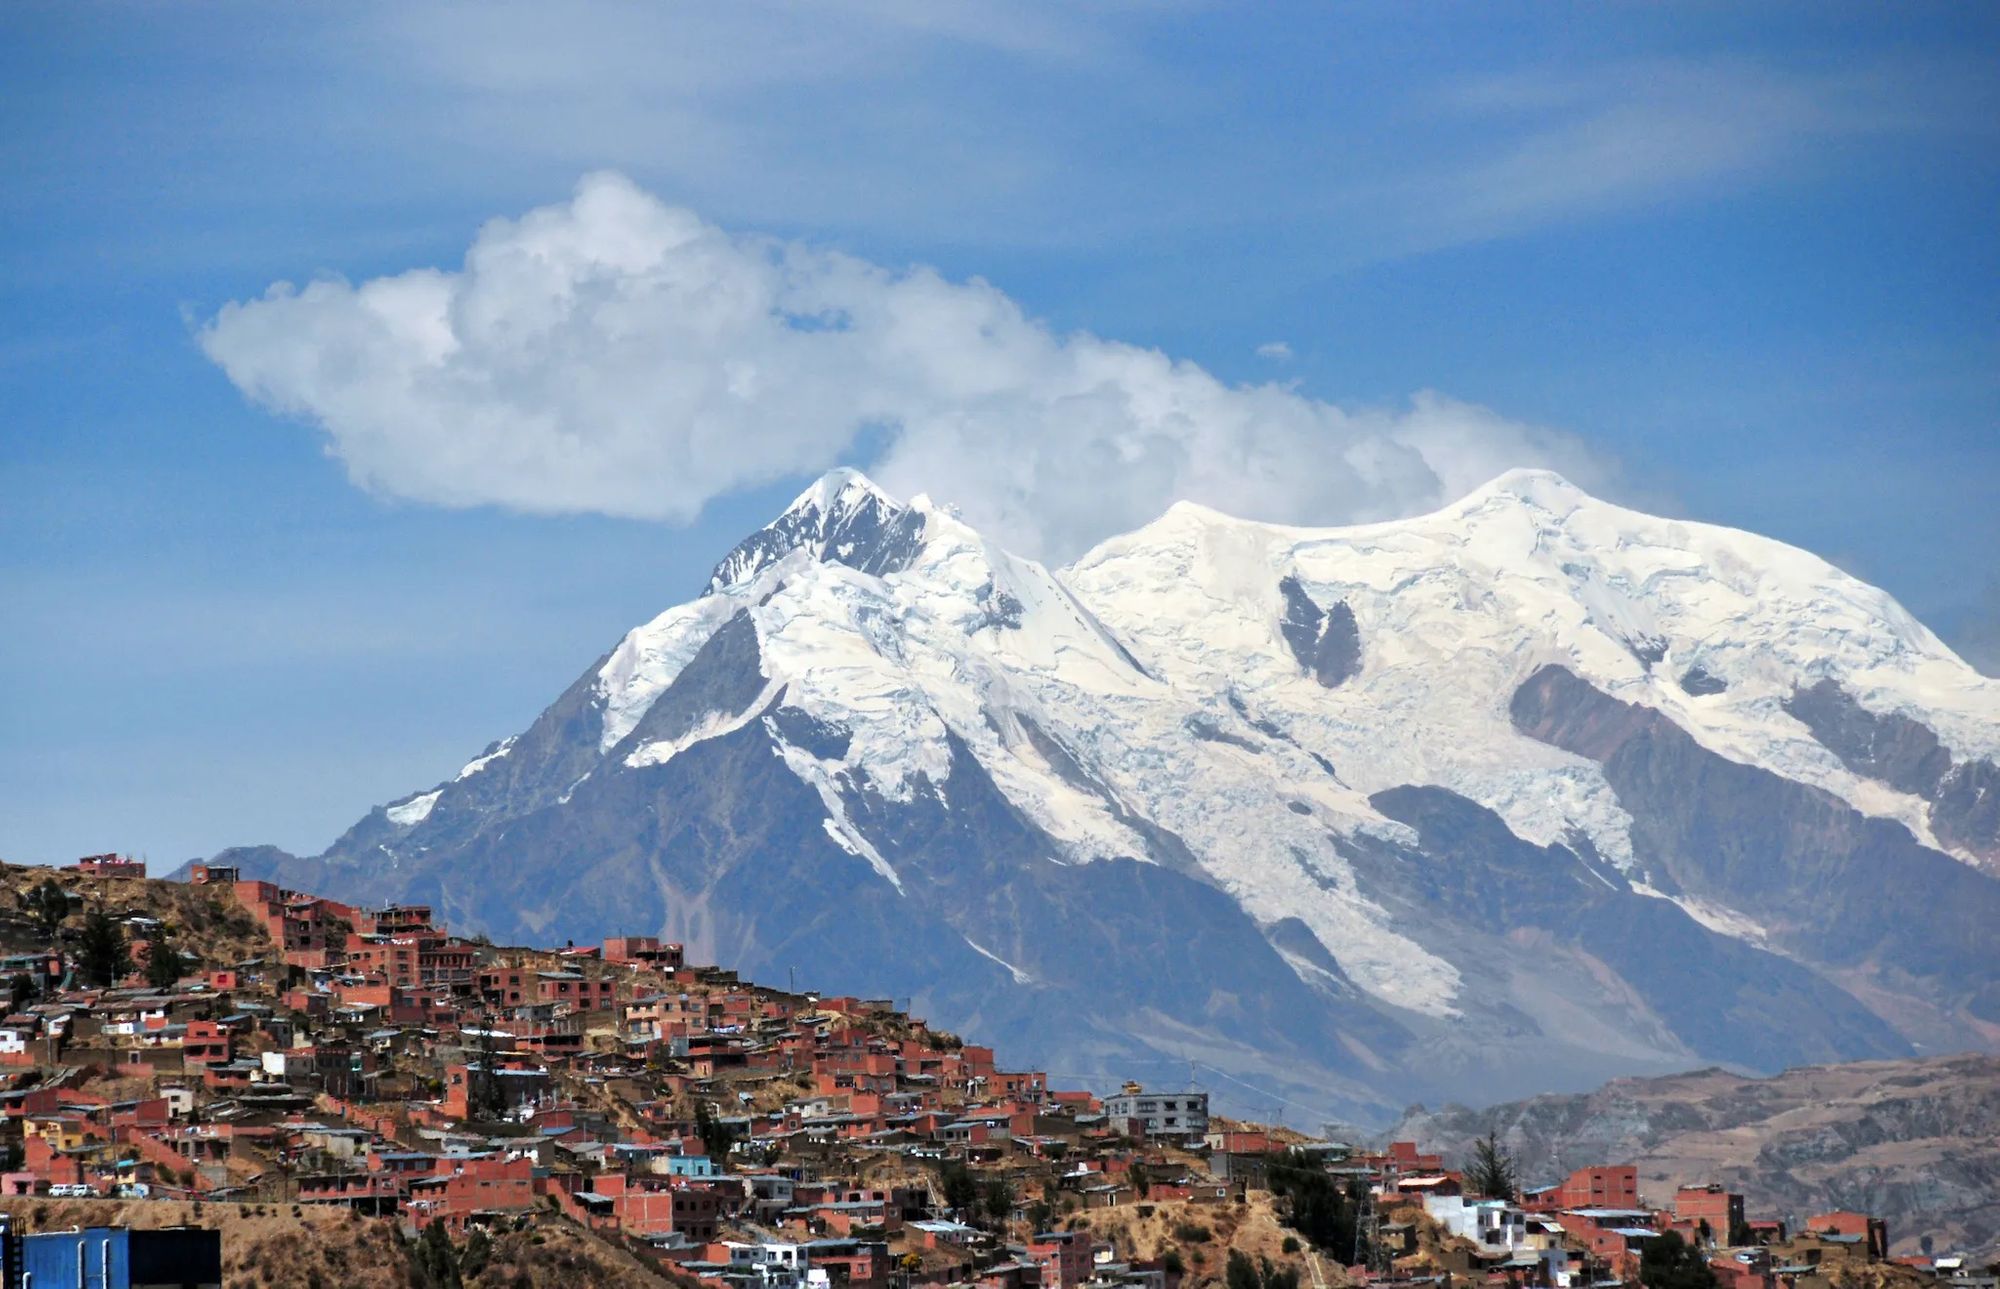 La Paz, Bolivia, the world's highest capital, with the Andes Mountains in the background.